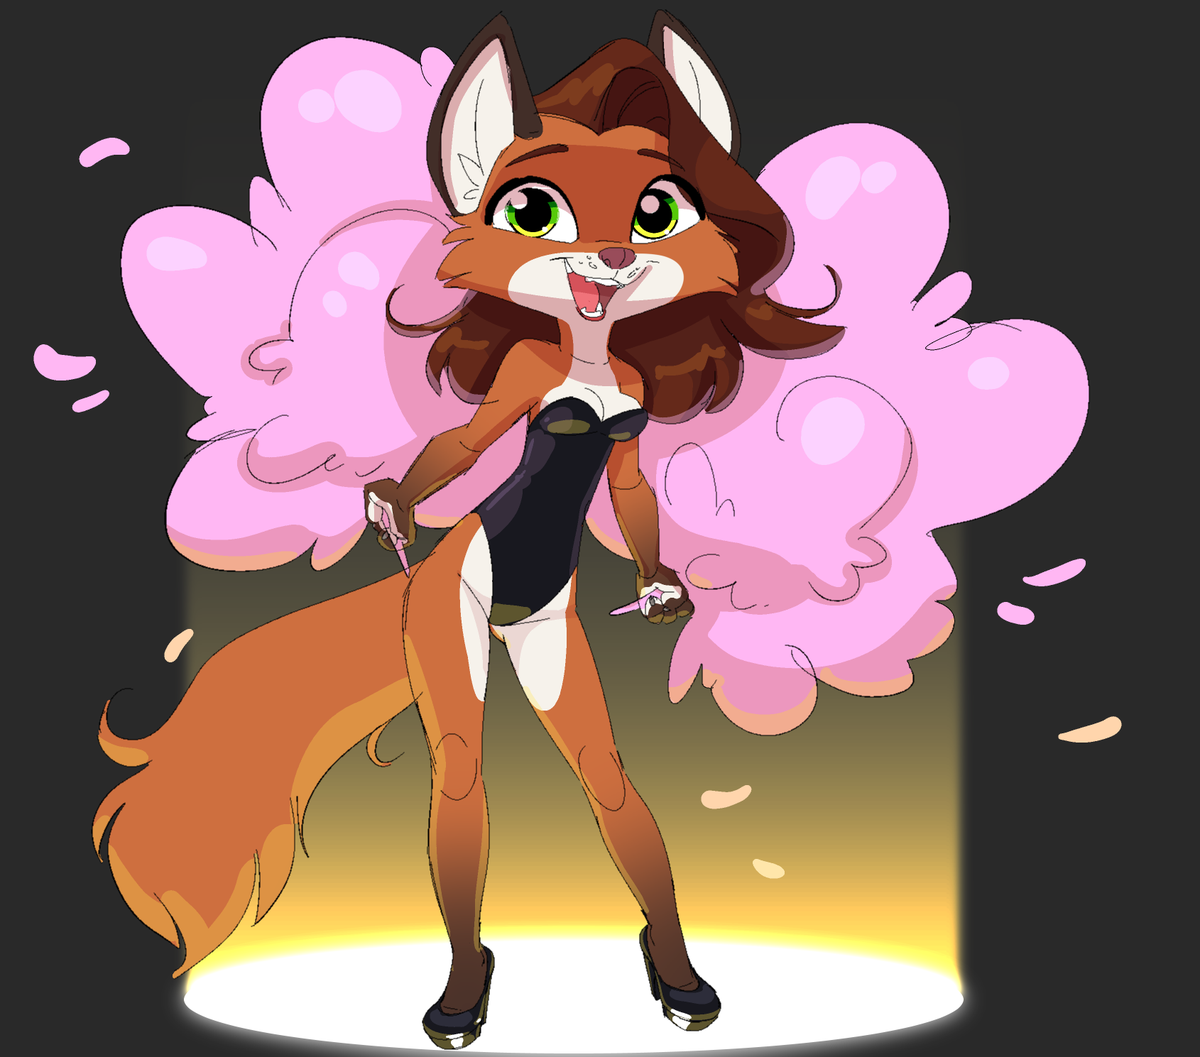 Have a showgirl fox in these troubled times.